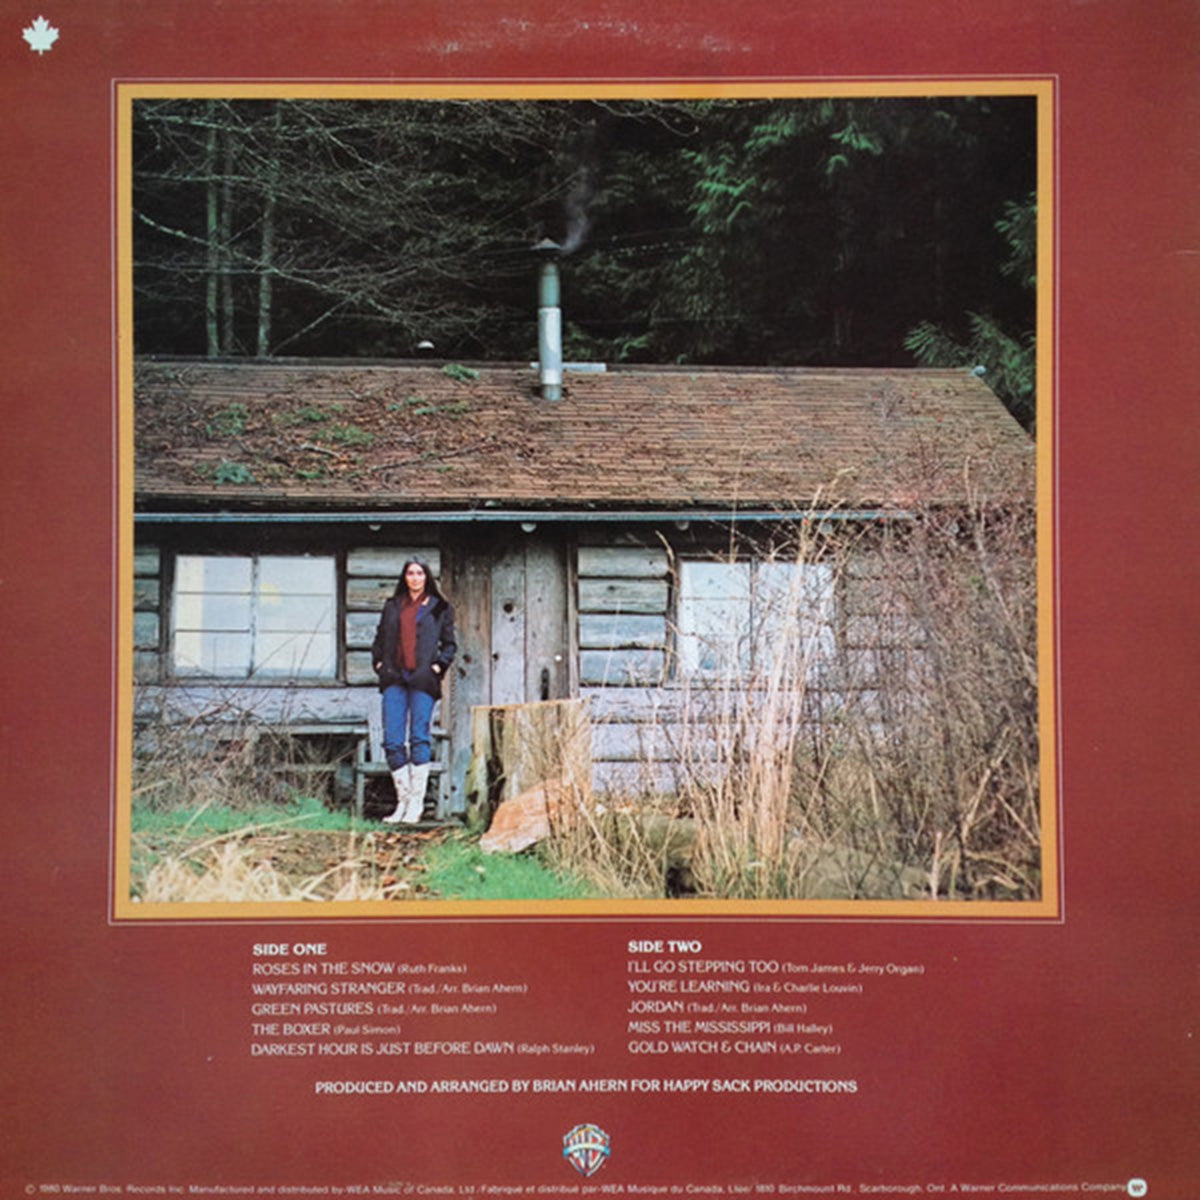 Emmylou Harris – Roses In The Snow 0 1980